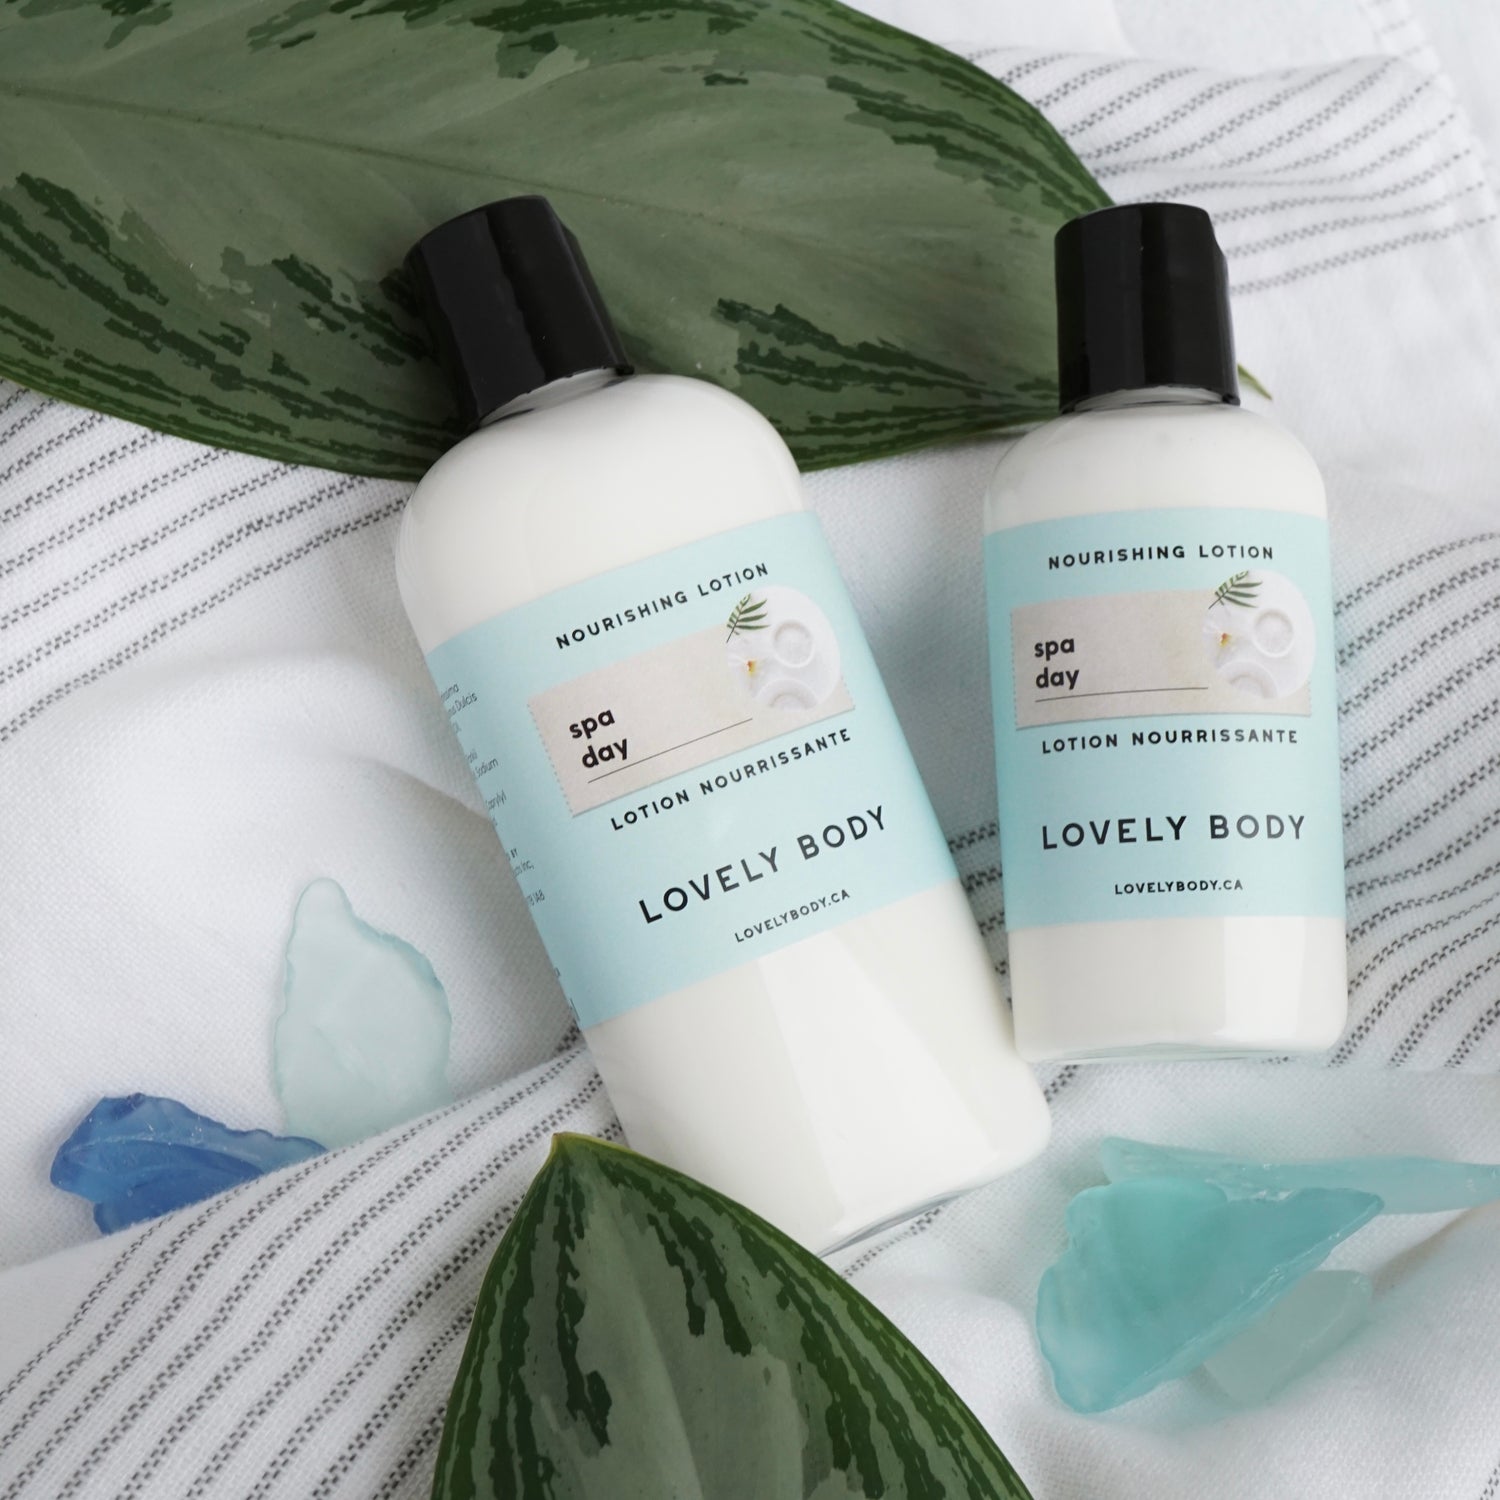 Two bottles of lotion on a towel with leaves and sea glass